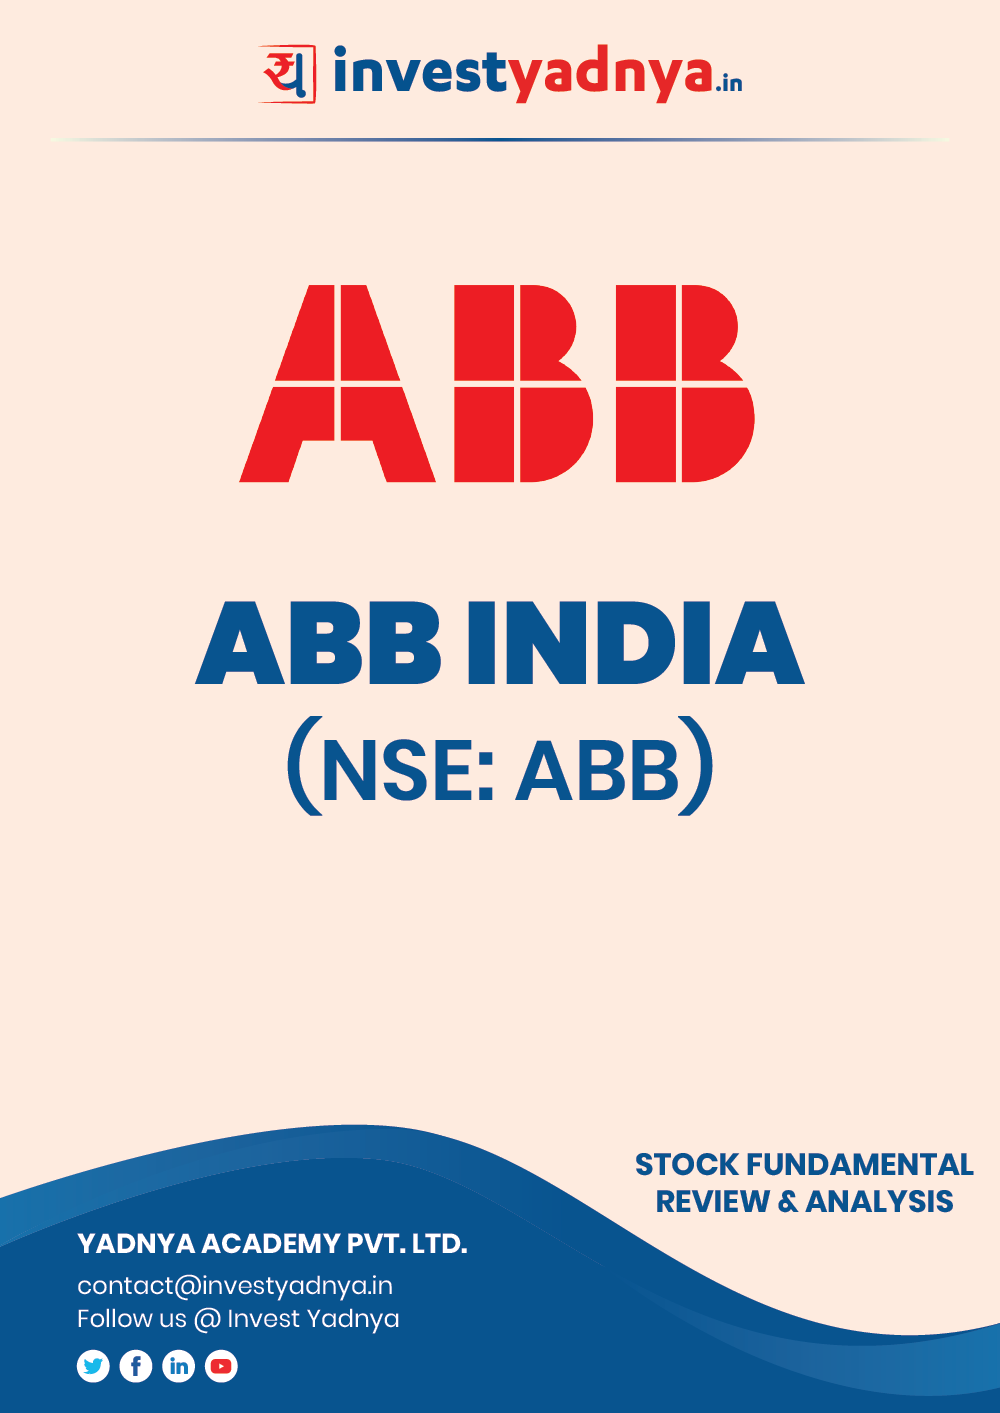 ABB India Ltd. Company/Stock Review & Analysis based on Q1 2020-21 and FY2019-20 data. The book contains Fundamental Analysis of the company considering both Quantitative (Financial) and Qualitative Parameters. ABB India is the subsidiary of ABB global is a diversified business with presence in multiple domain. ABB India is rated on 5 parameters – Company, Industry, Governance, Financials & Valuations.